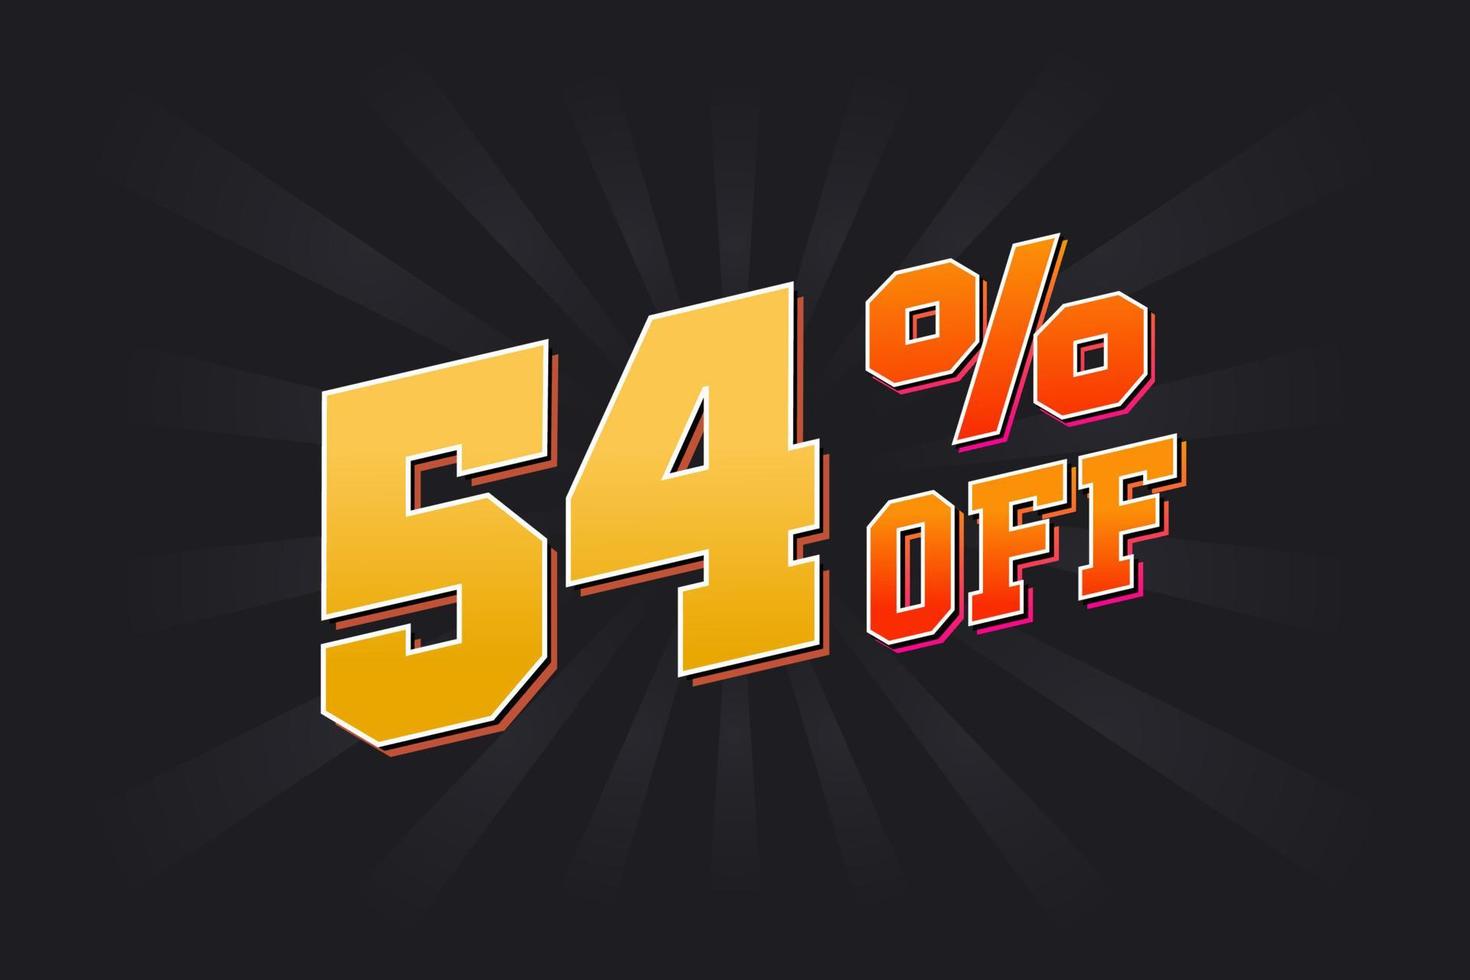 54 Percent off Special Discount Offer. 54 off Sale of advertising campaign vector graphics.